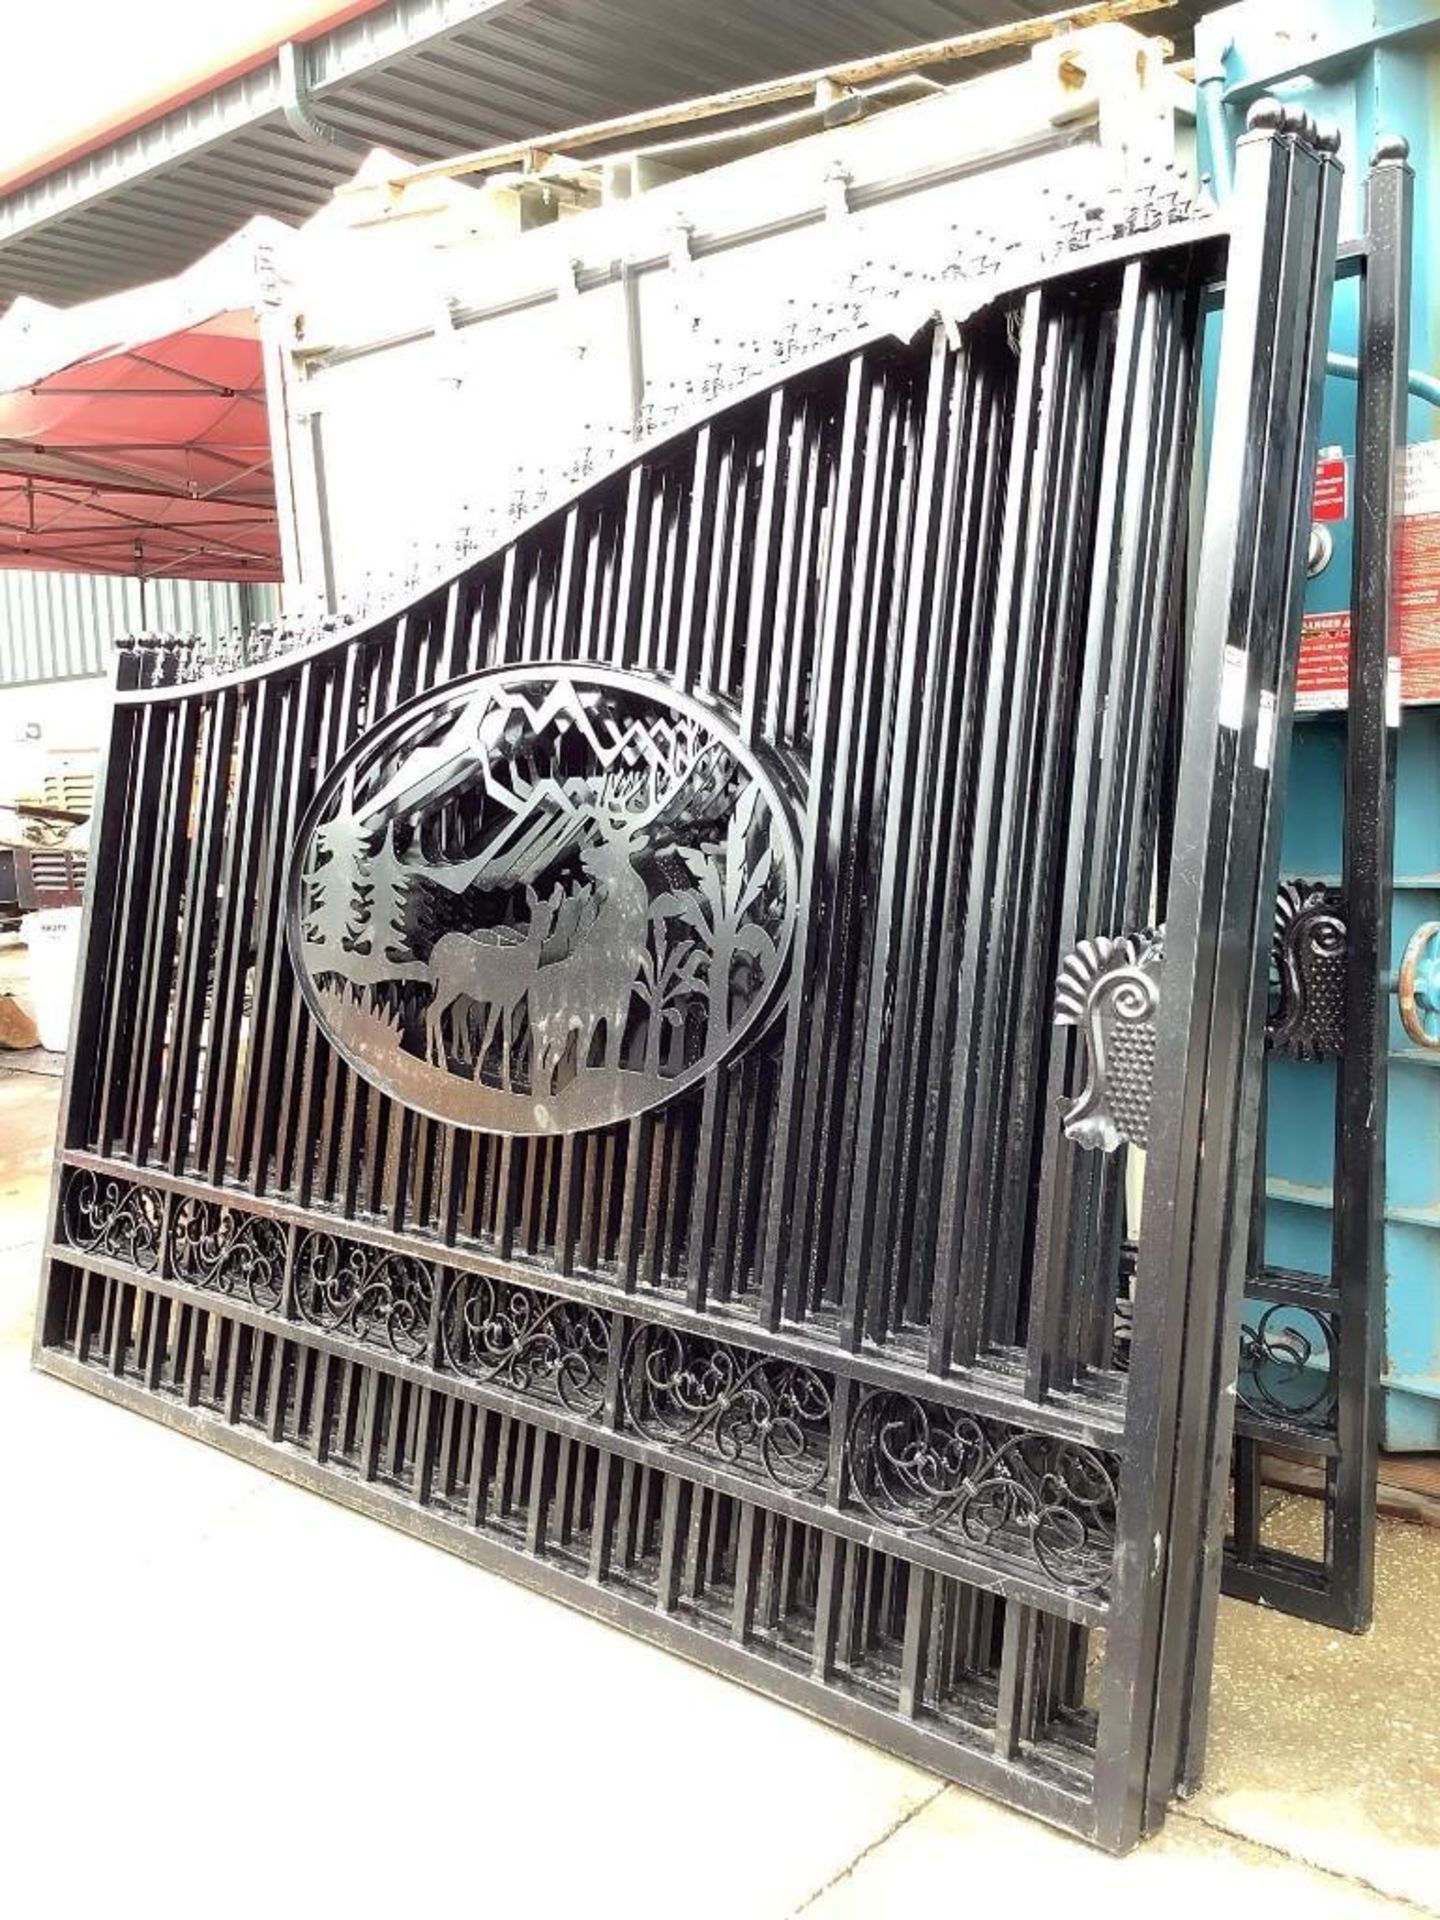 SET OF UNUSED GREAT BEAR 20FT BI PARTING WROUGHT IRON GATES, 10FT EACH PIECE (20' TOTAL WIDTH). 2 PI - Image 2 of 3